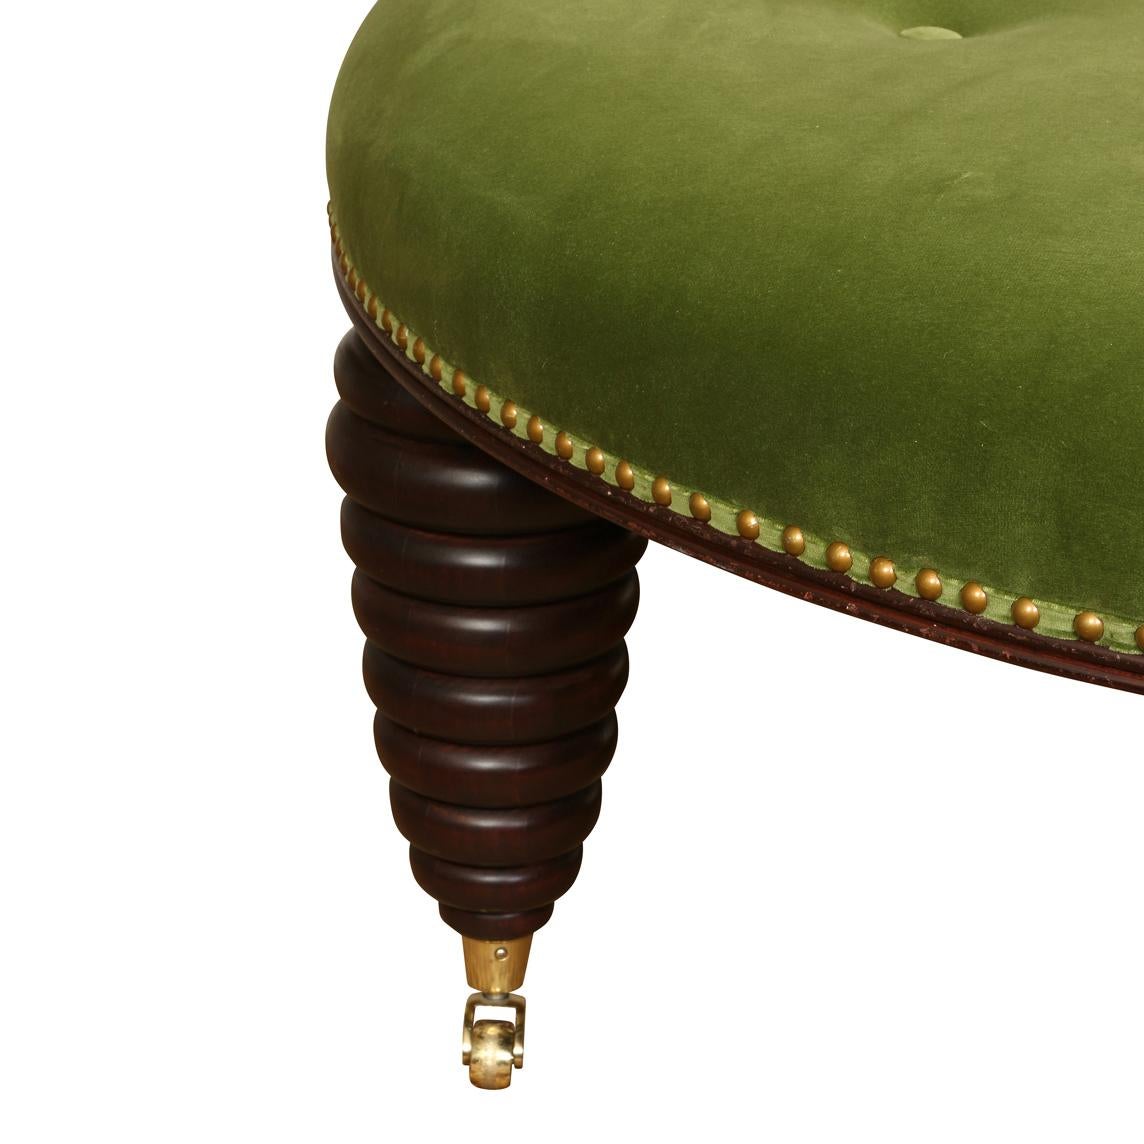 A generously sized, round button tufted ottoman with nailhead trim, newly reupholstered in green velvet with stacked, circular modern shaped legs on casters